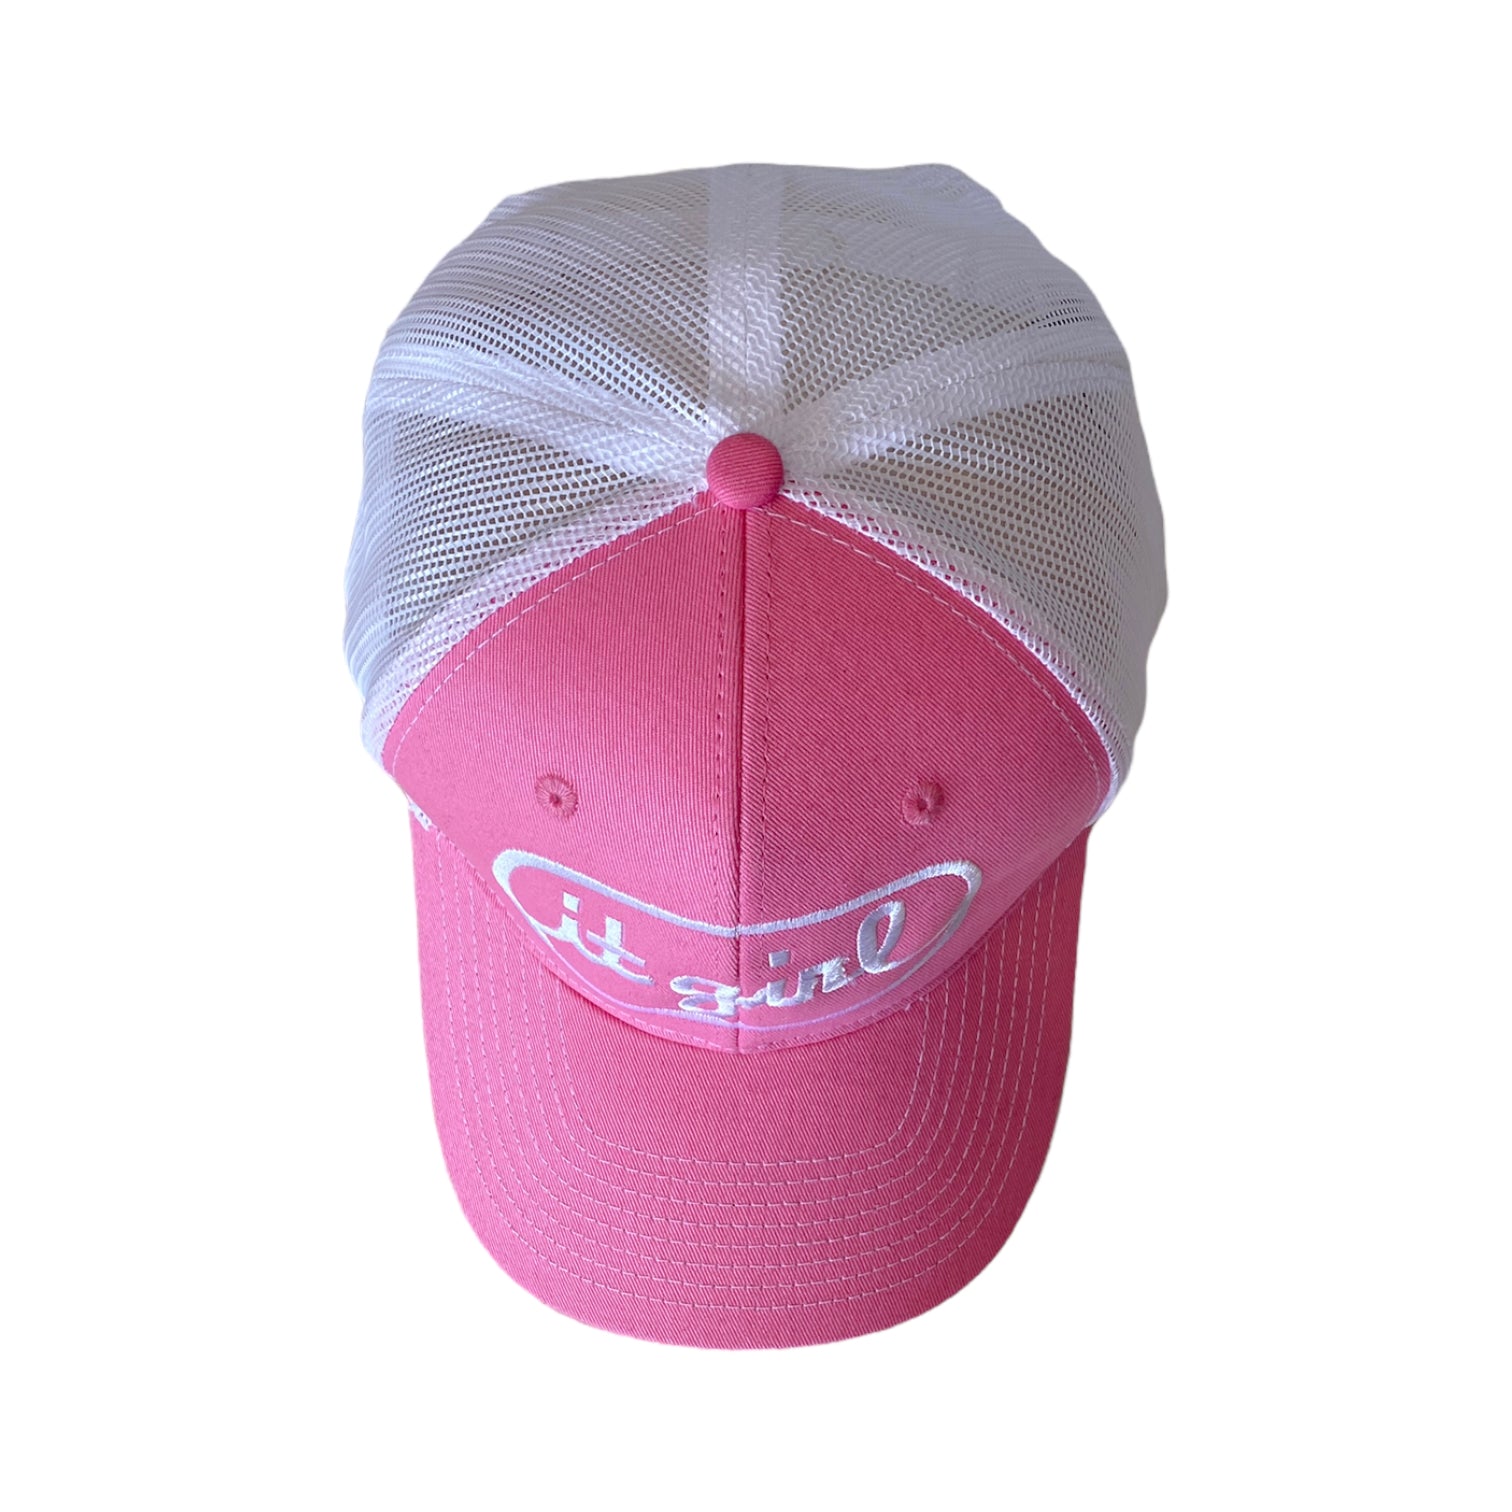 top down view of pink and white trucker hat with white embroidery reading it girl in cursive